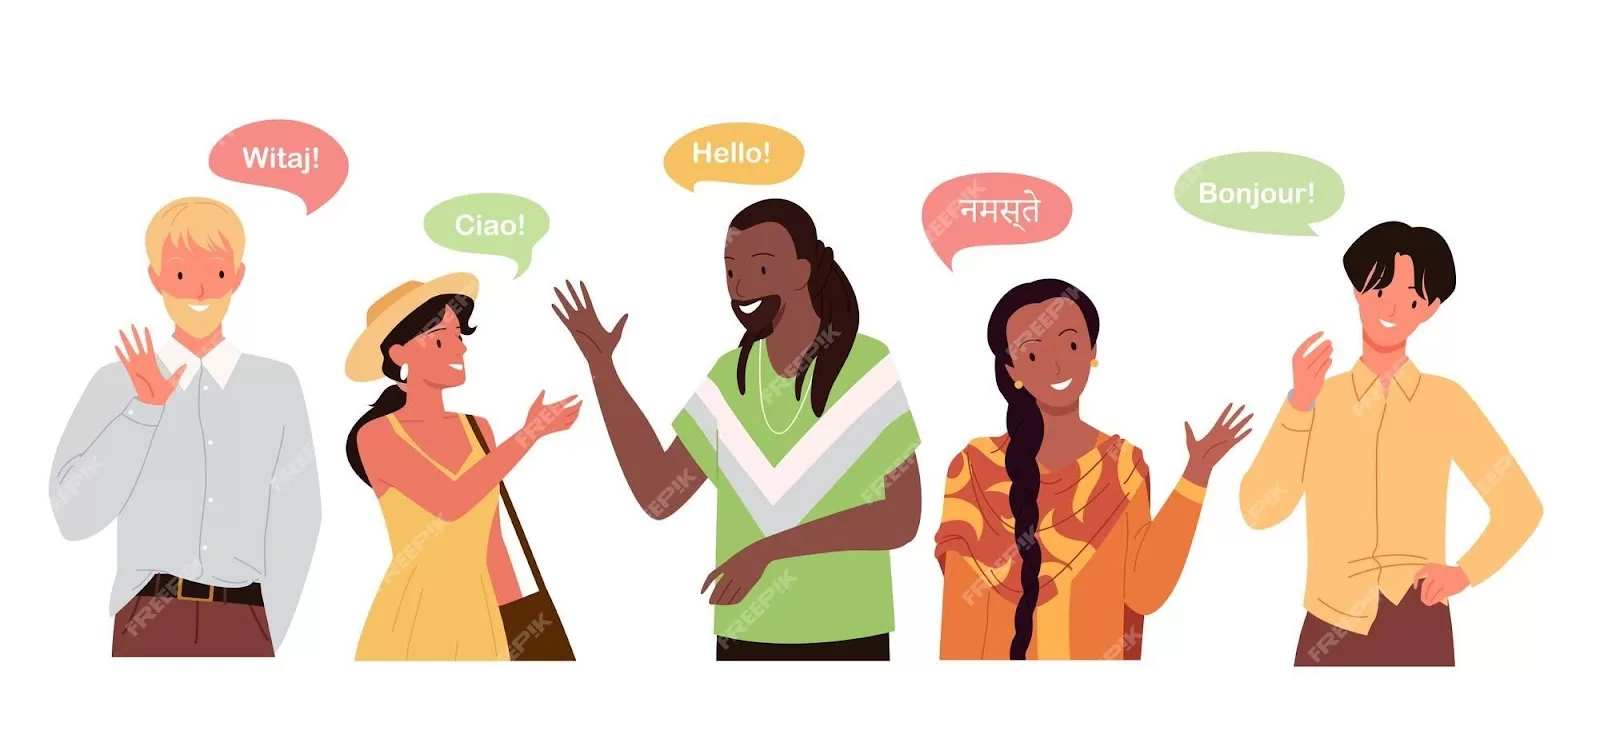 100 Ways to Say Hello in Different Languages + Great Examples